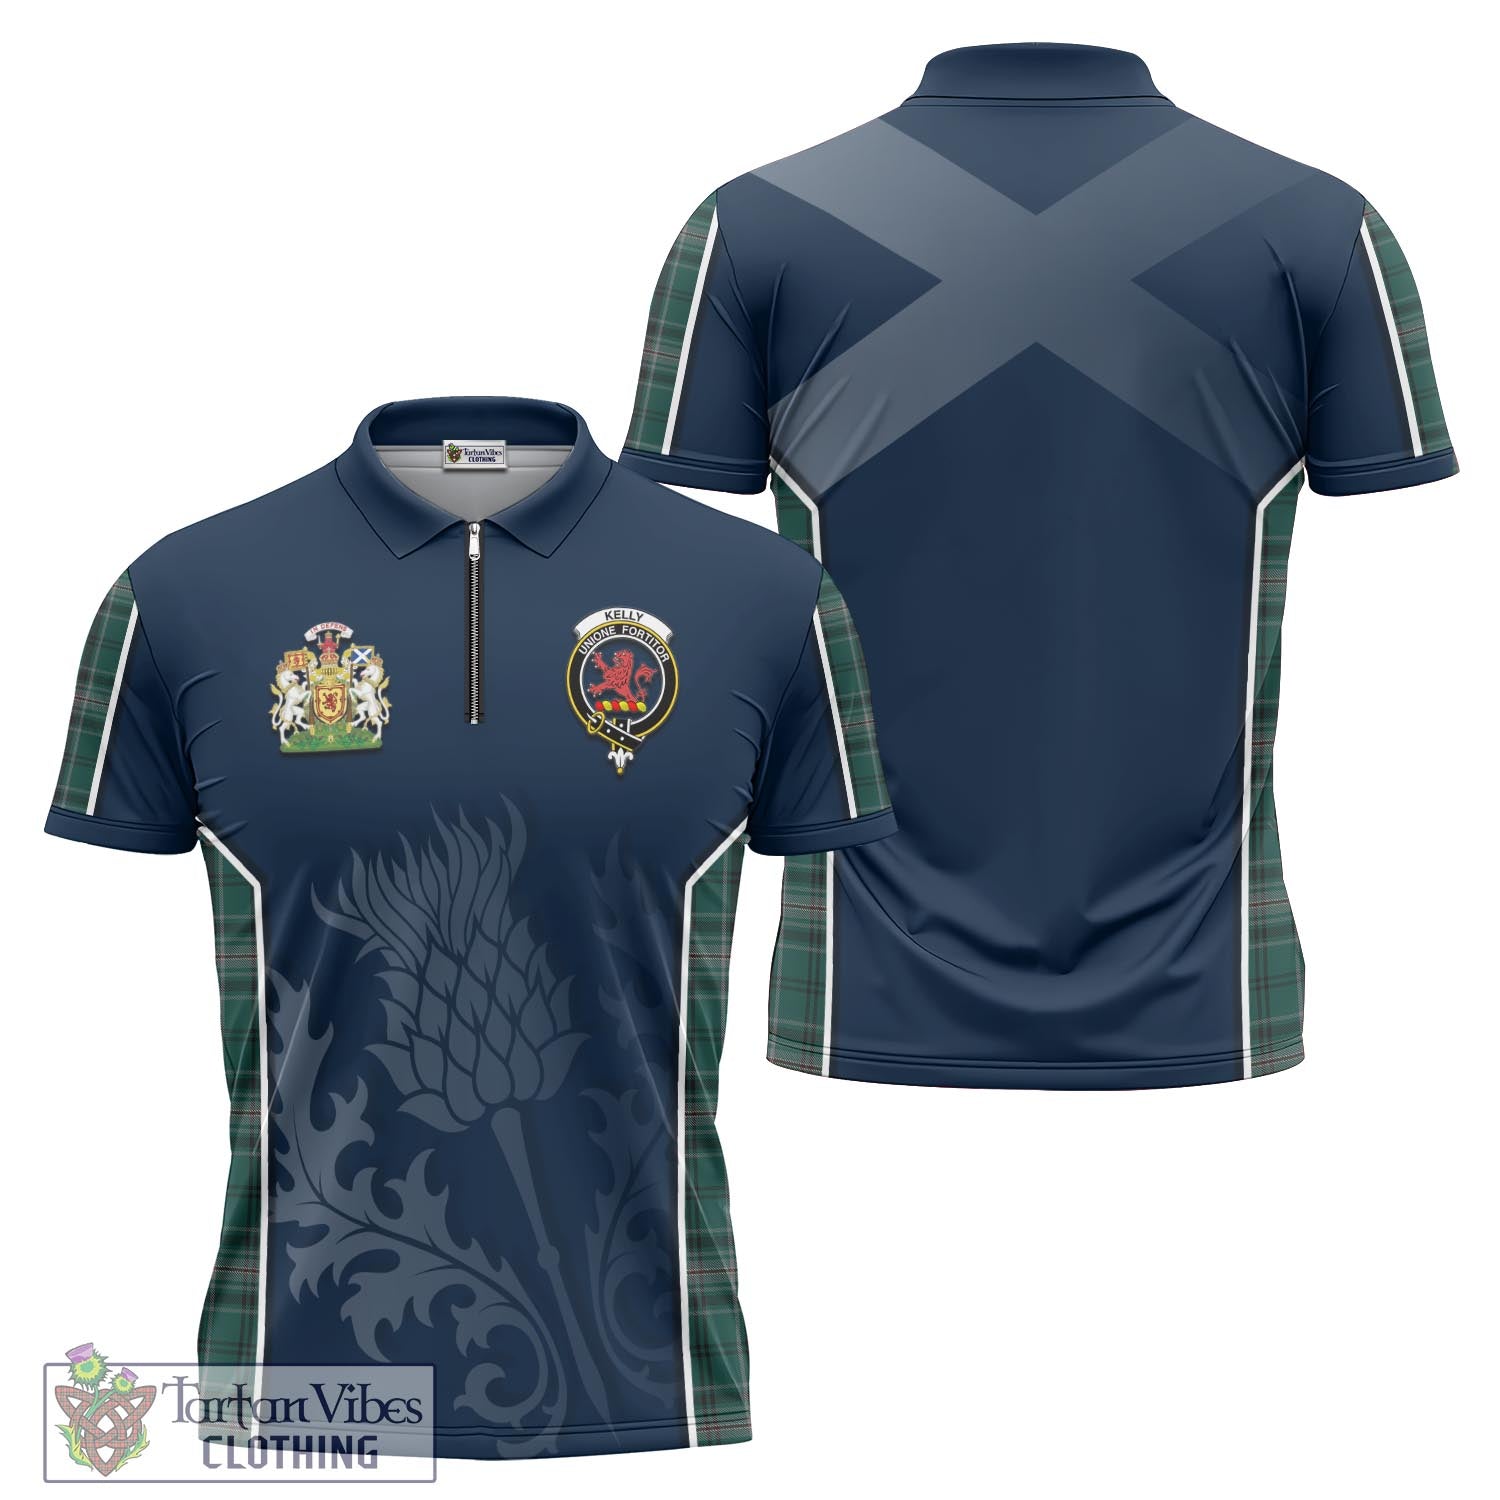 Tartan Vibes Clothing Kelly of Sleat Hunting Tartan Zipper Polo Shirt with Family Crest and Scottish Thistle Vibes Sport Style